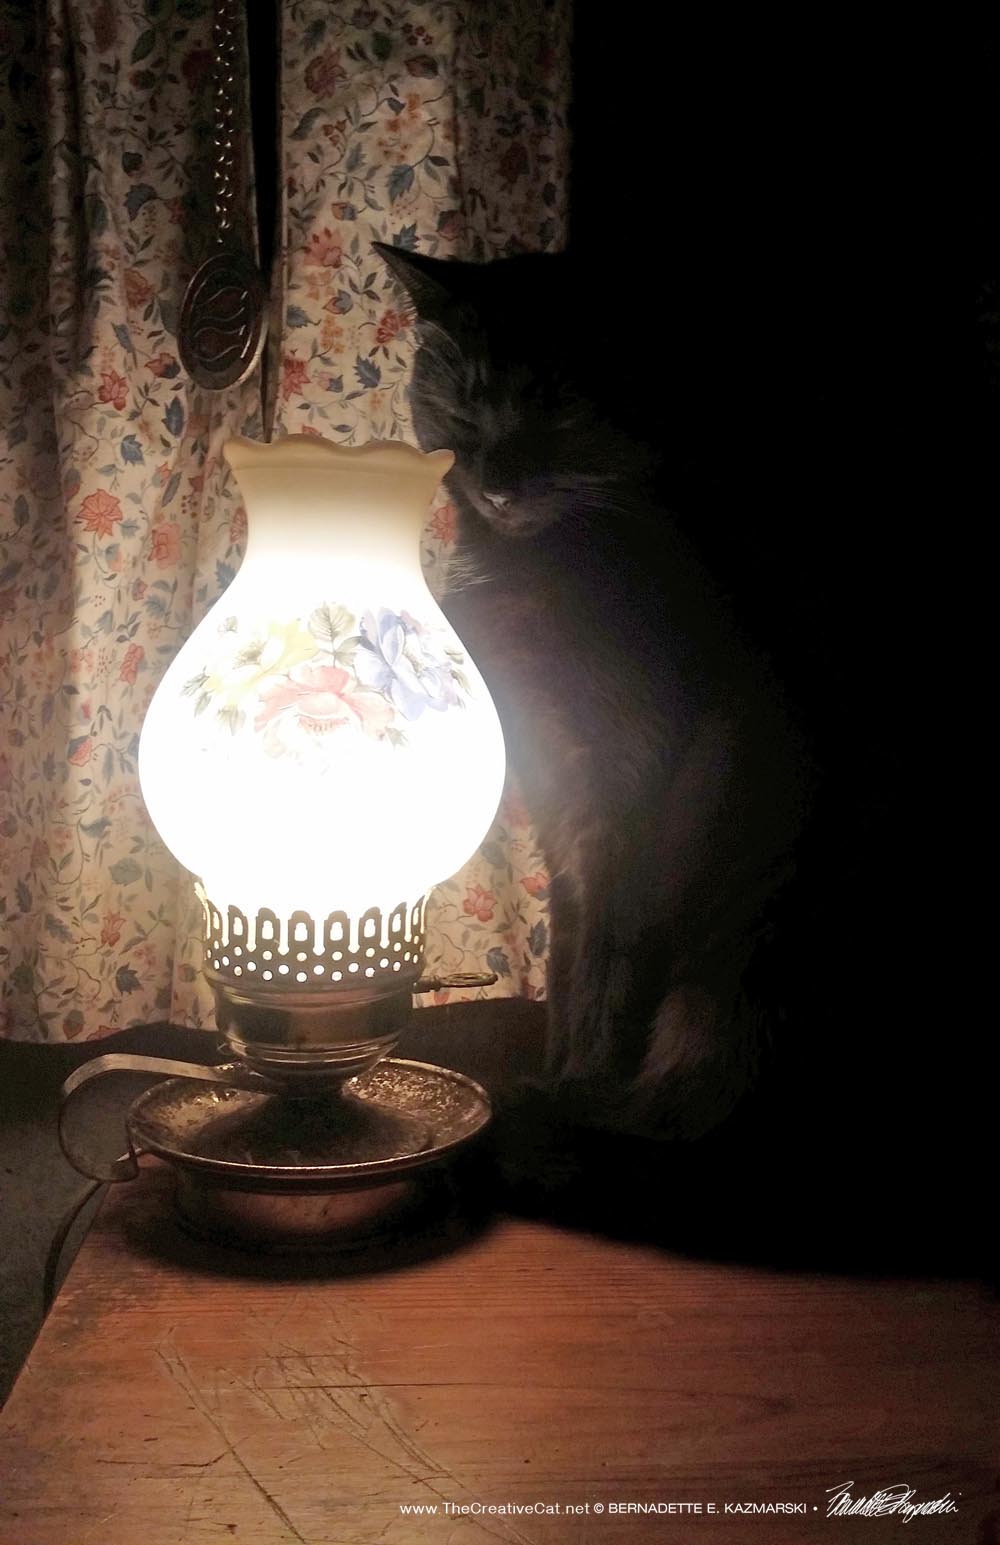 Bella by her keep-warm lamp.